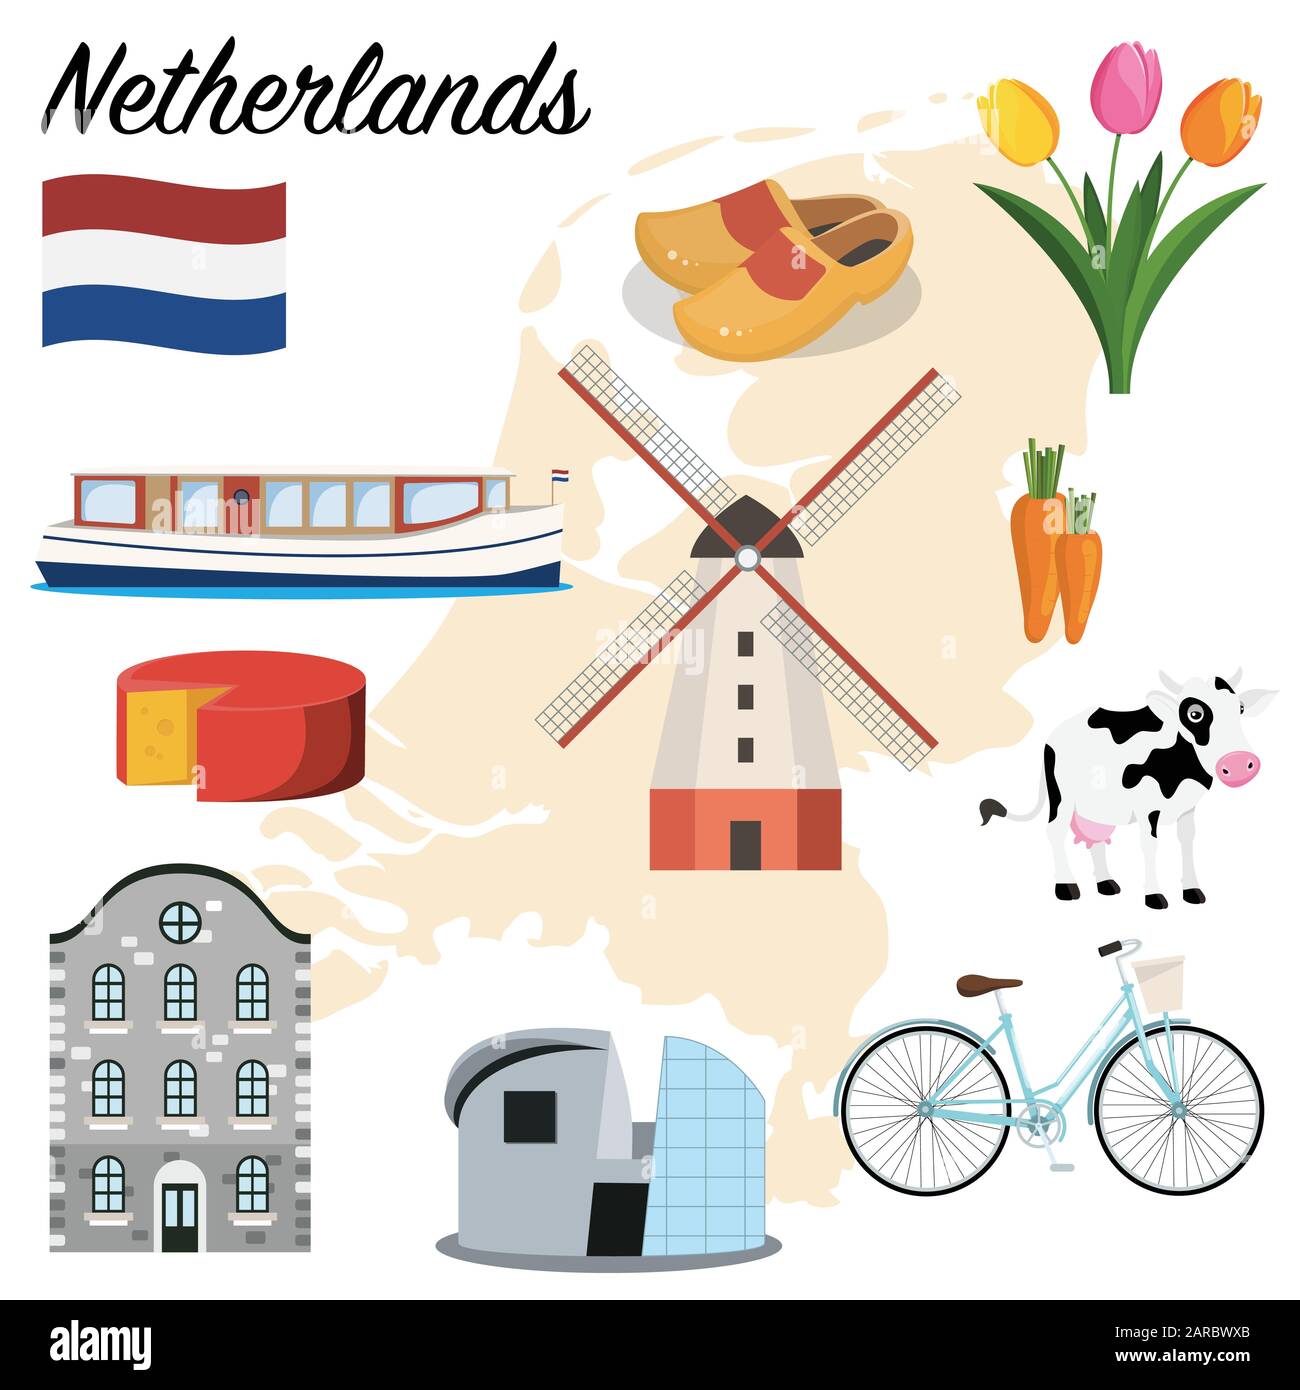 Netherlands set. Canal boat, cheese, windmill, clogs, tulips, bicycle and museum. cartoon vector illustration Stock Vector